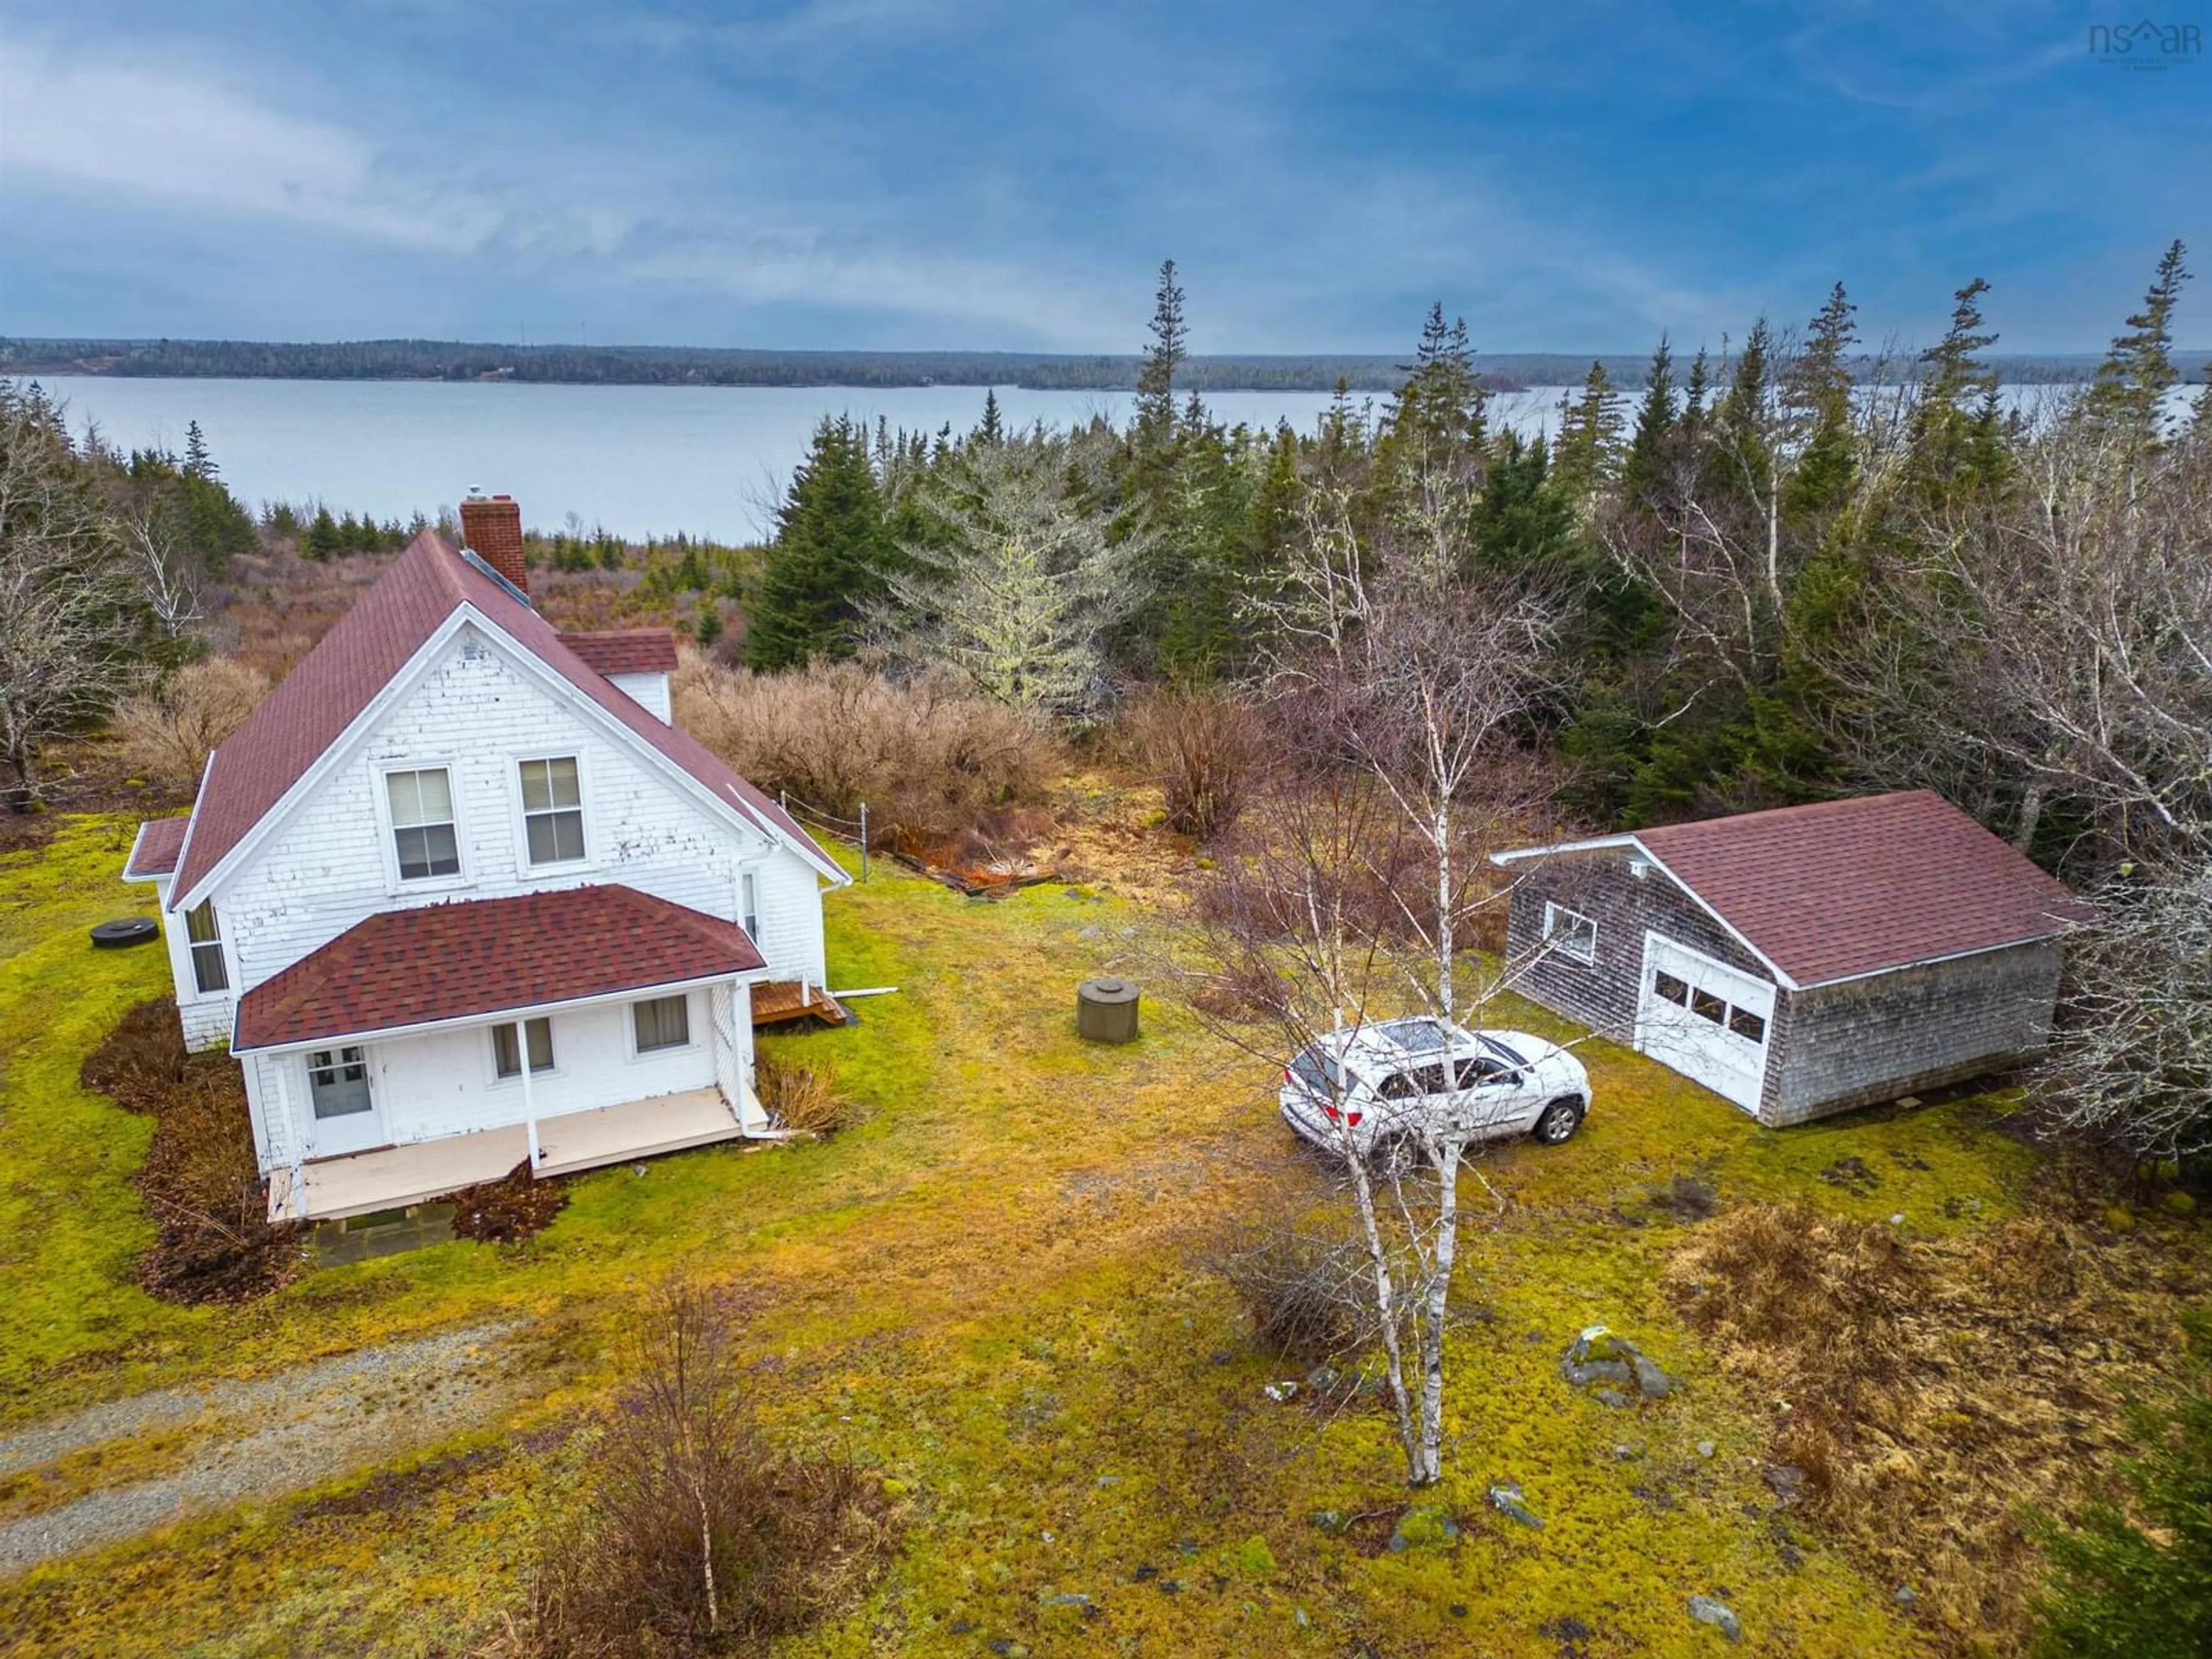 Home with unknown exterior material for 570 Rockland Rd, Rockland Nova Scotia B0T 1V0